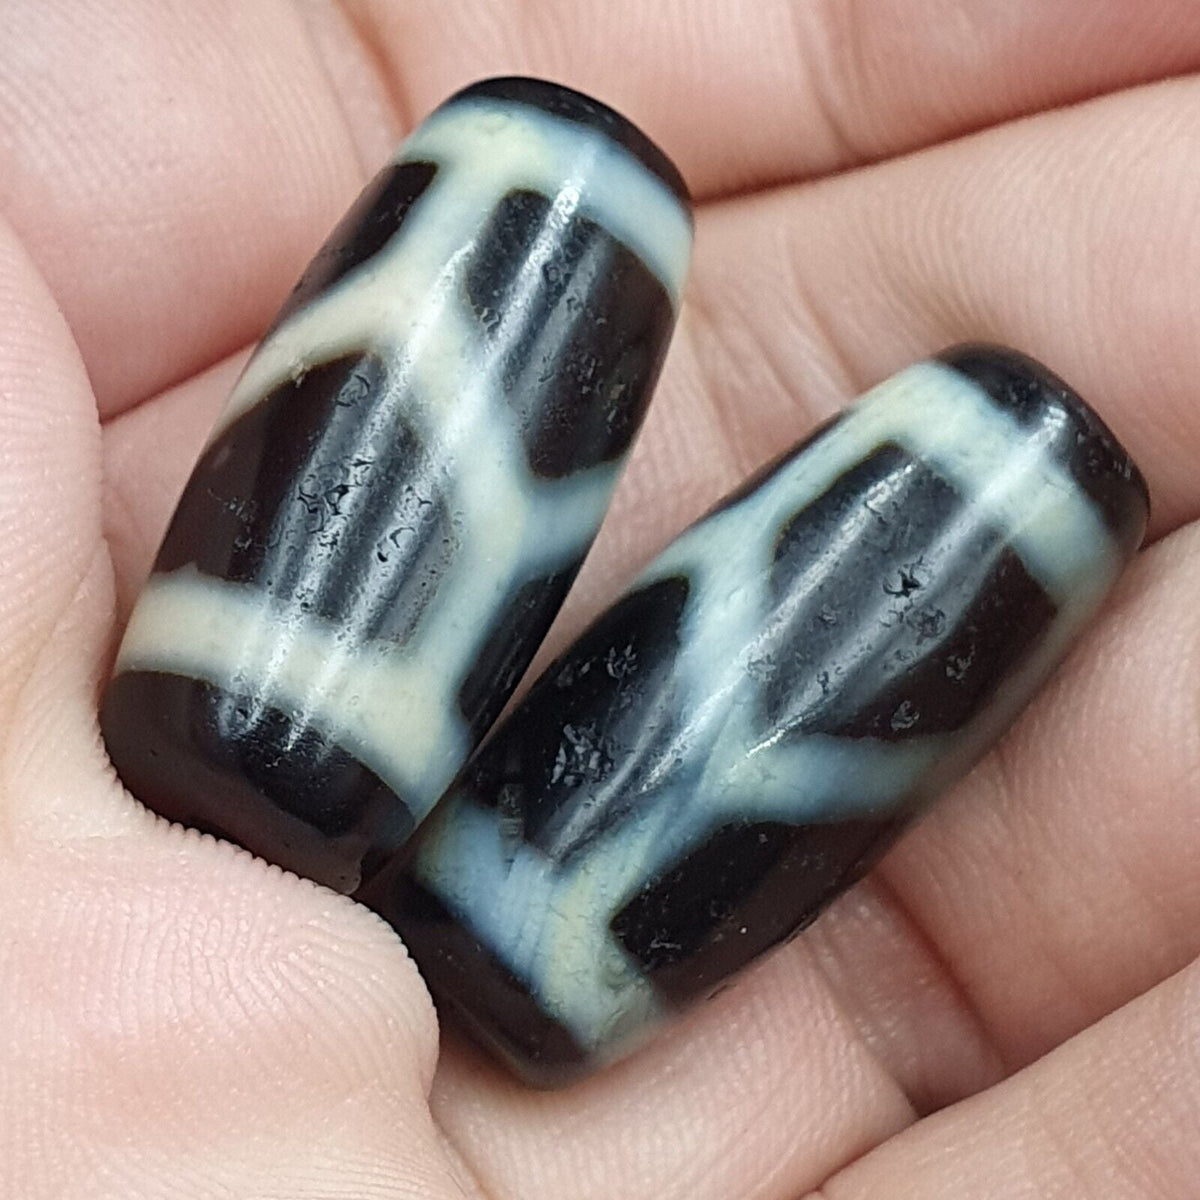 "Two antique Himalayan Indo-Tibetan Agate beads, featuring unique and intricate patterns, typically found in Dzi beads. These rare and precious beads are highly valued for their spiritual significance and cultural heritage, and are believed to bring good fortune and protection to the wearer."